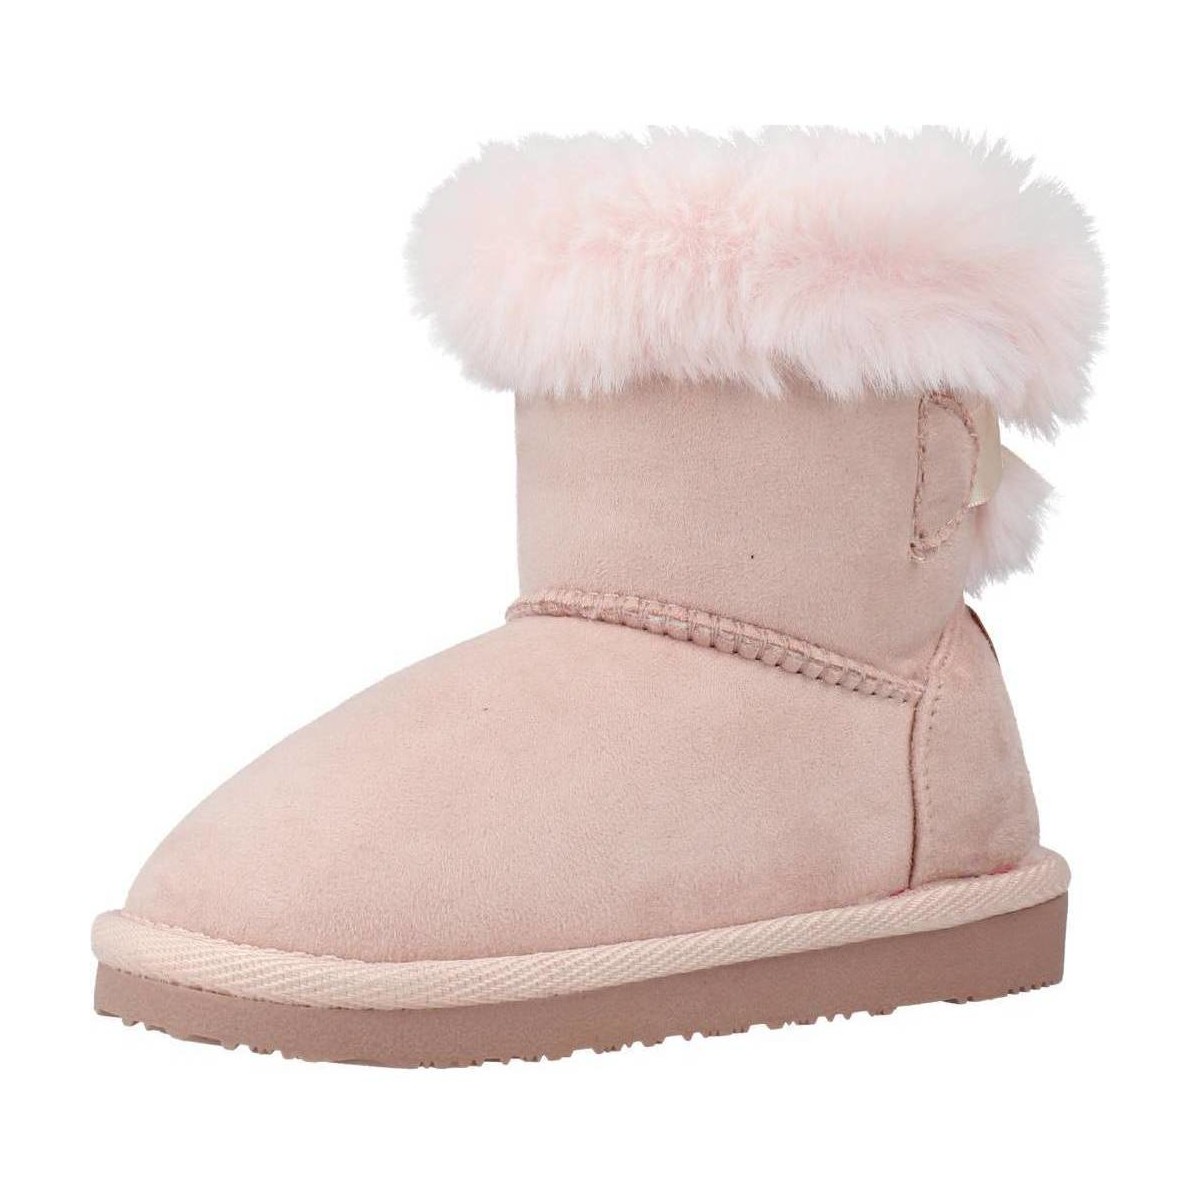 Chaussures Fille Bottes Osito MIS14066 Rose